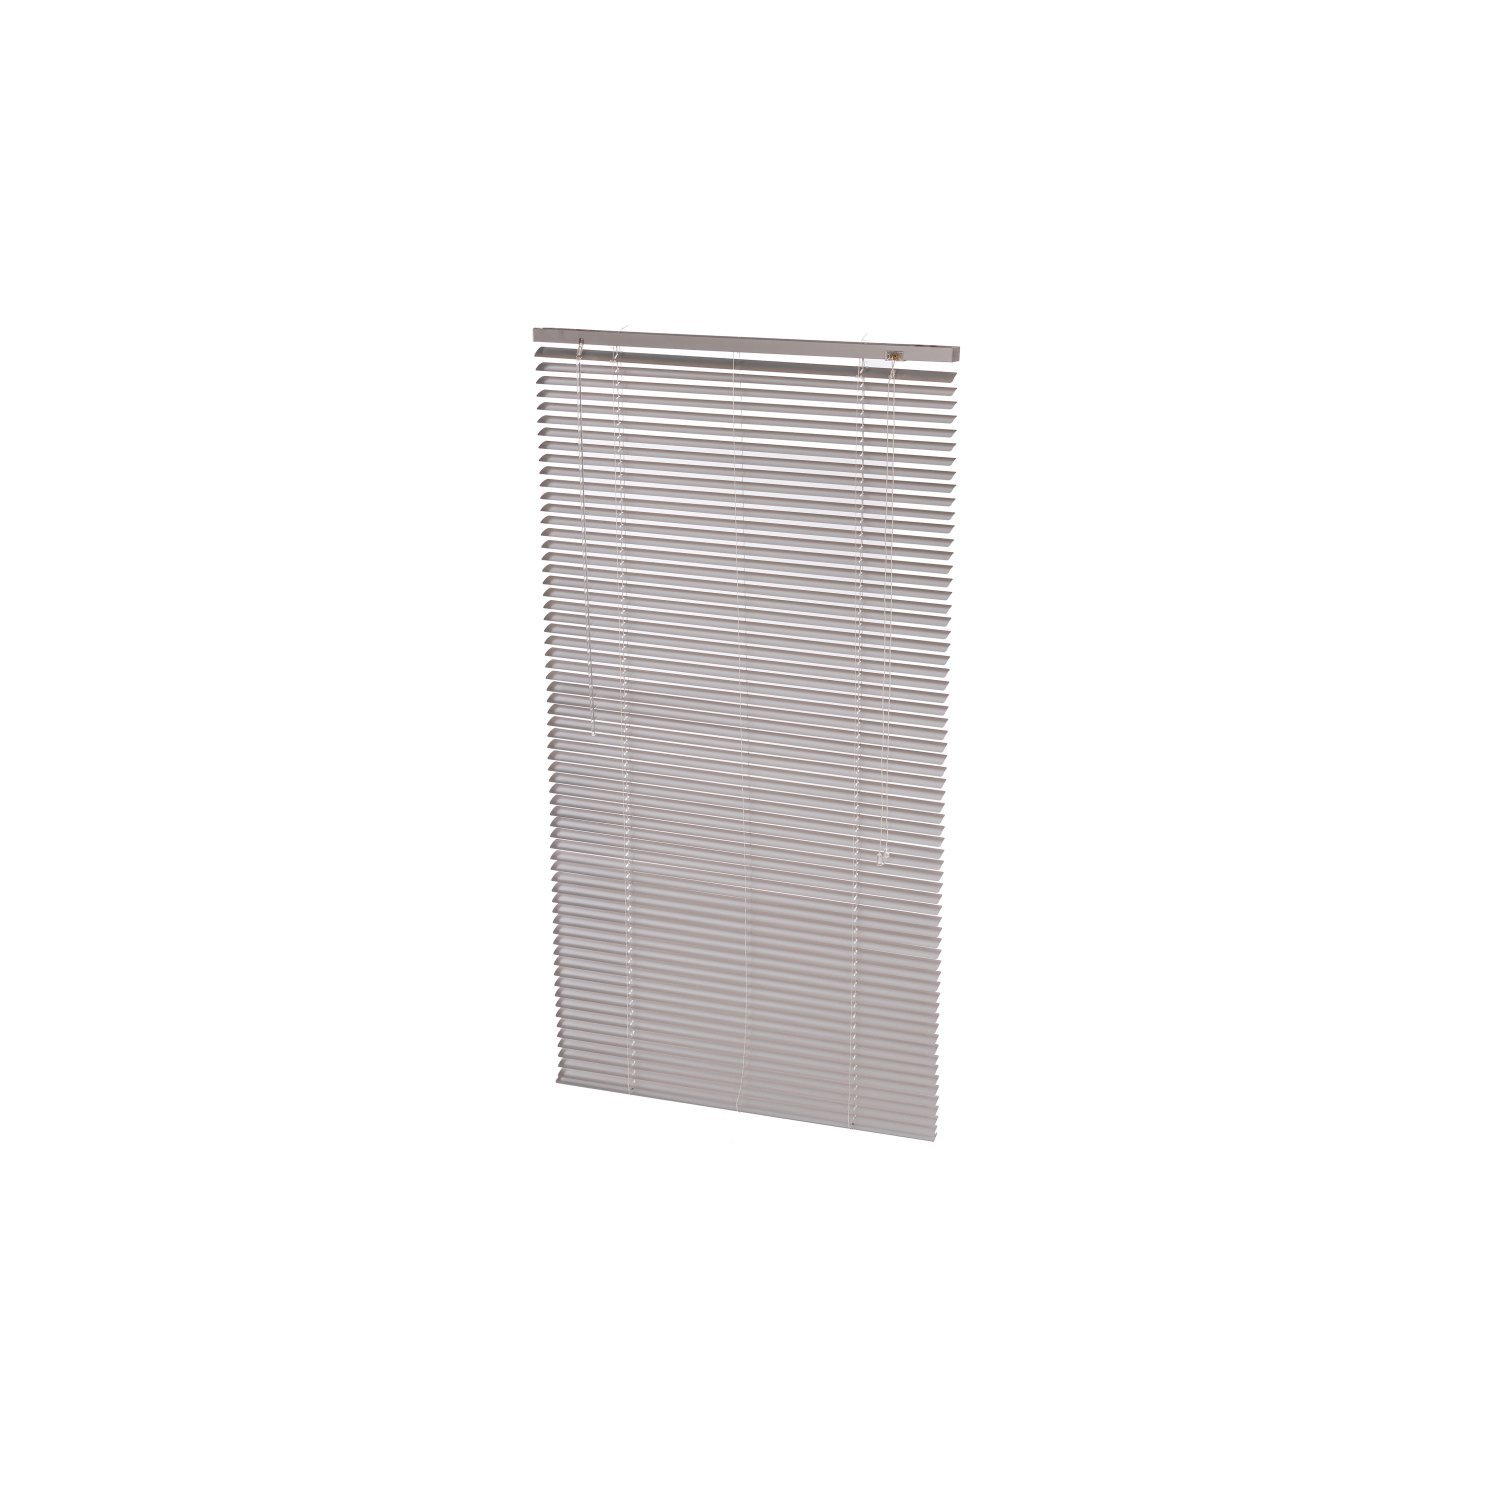 80 x 150cm Aluminium Silver Home Office Venetian Window Blinds with Fixings